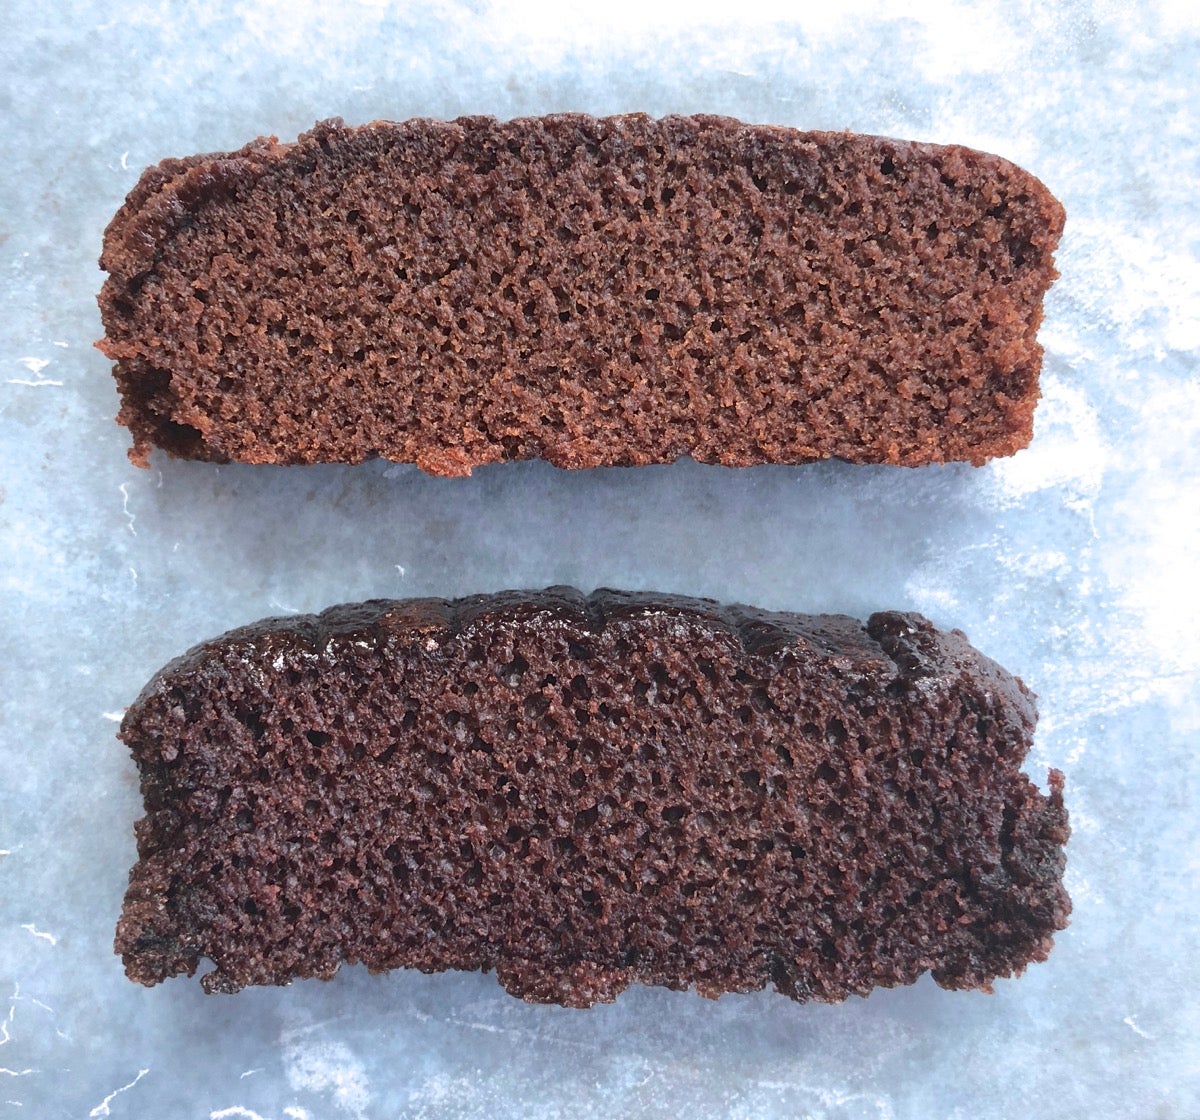 Two slices of chocolate cake, one made with Baking Sugar Alternative, one with regular cane sugar, showing their relative rise.